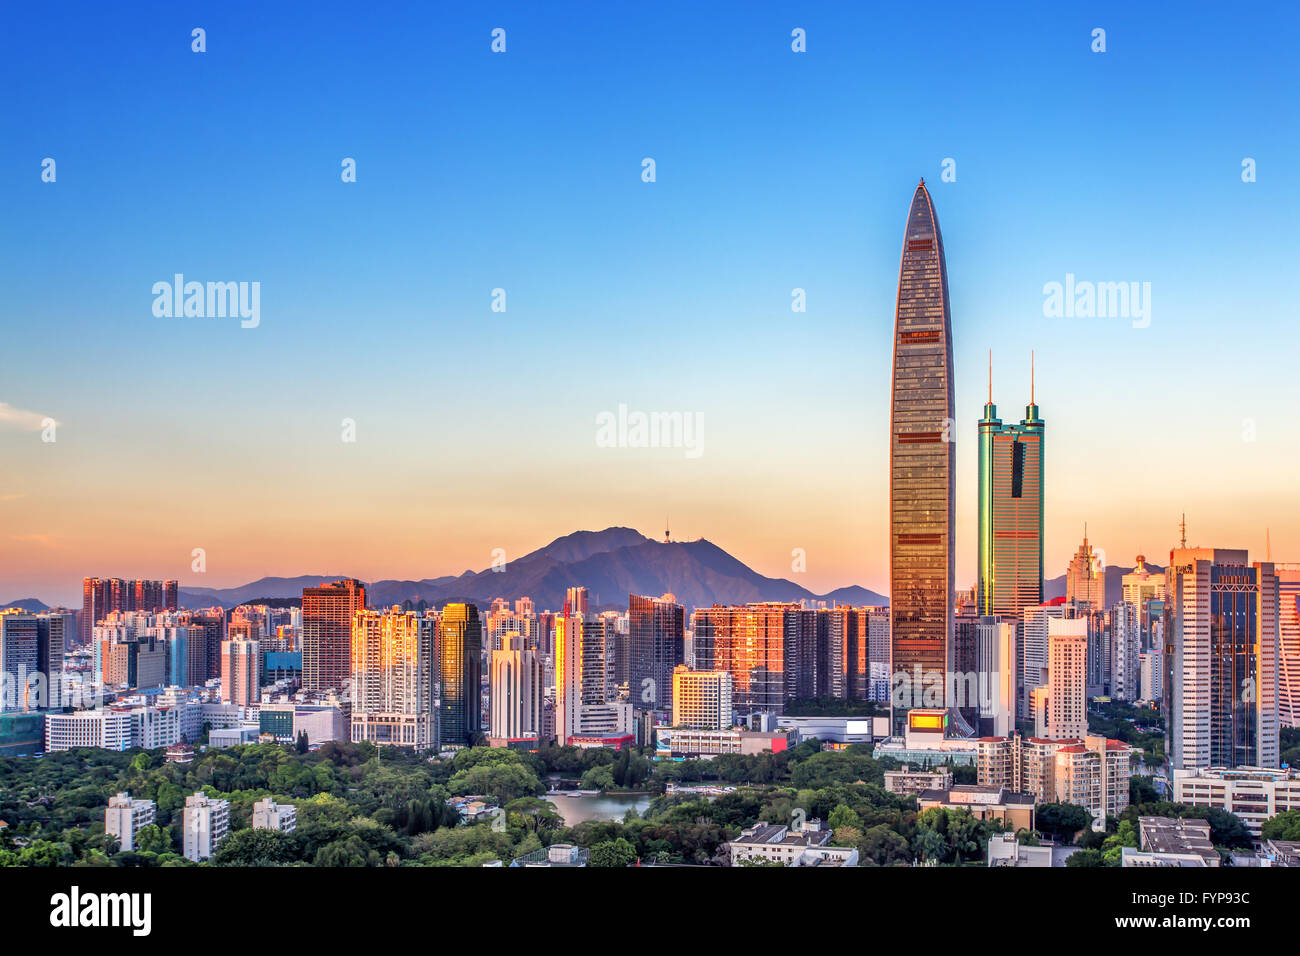 skyscrapers and mansions of a modern city Stock Photo